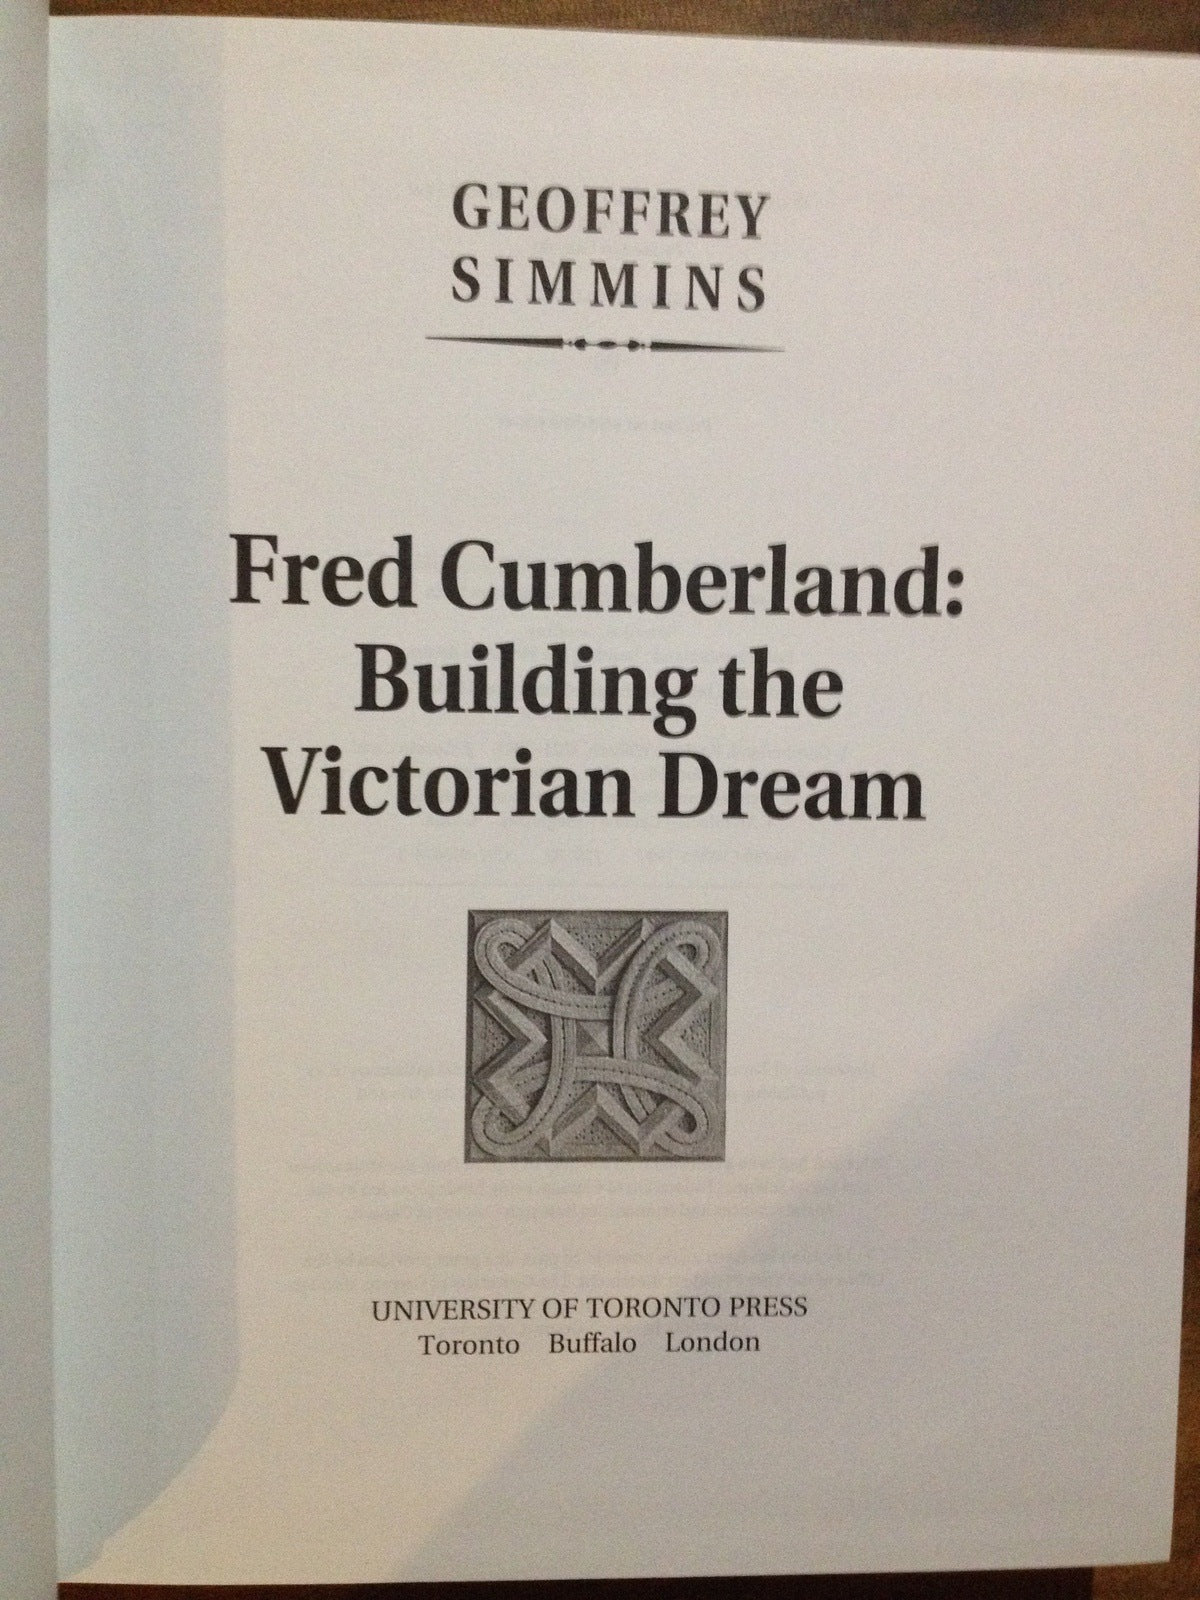 FRED CUMBERLAND - BUILDING THE VICTORIAN DREAM  BY: GEOFFREY SIMMINS BooksCardsNBikes